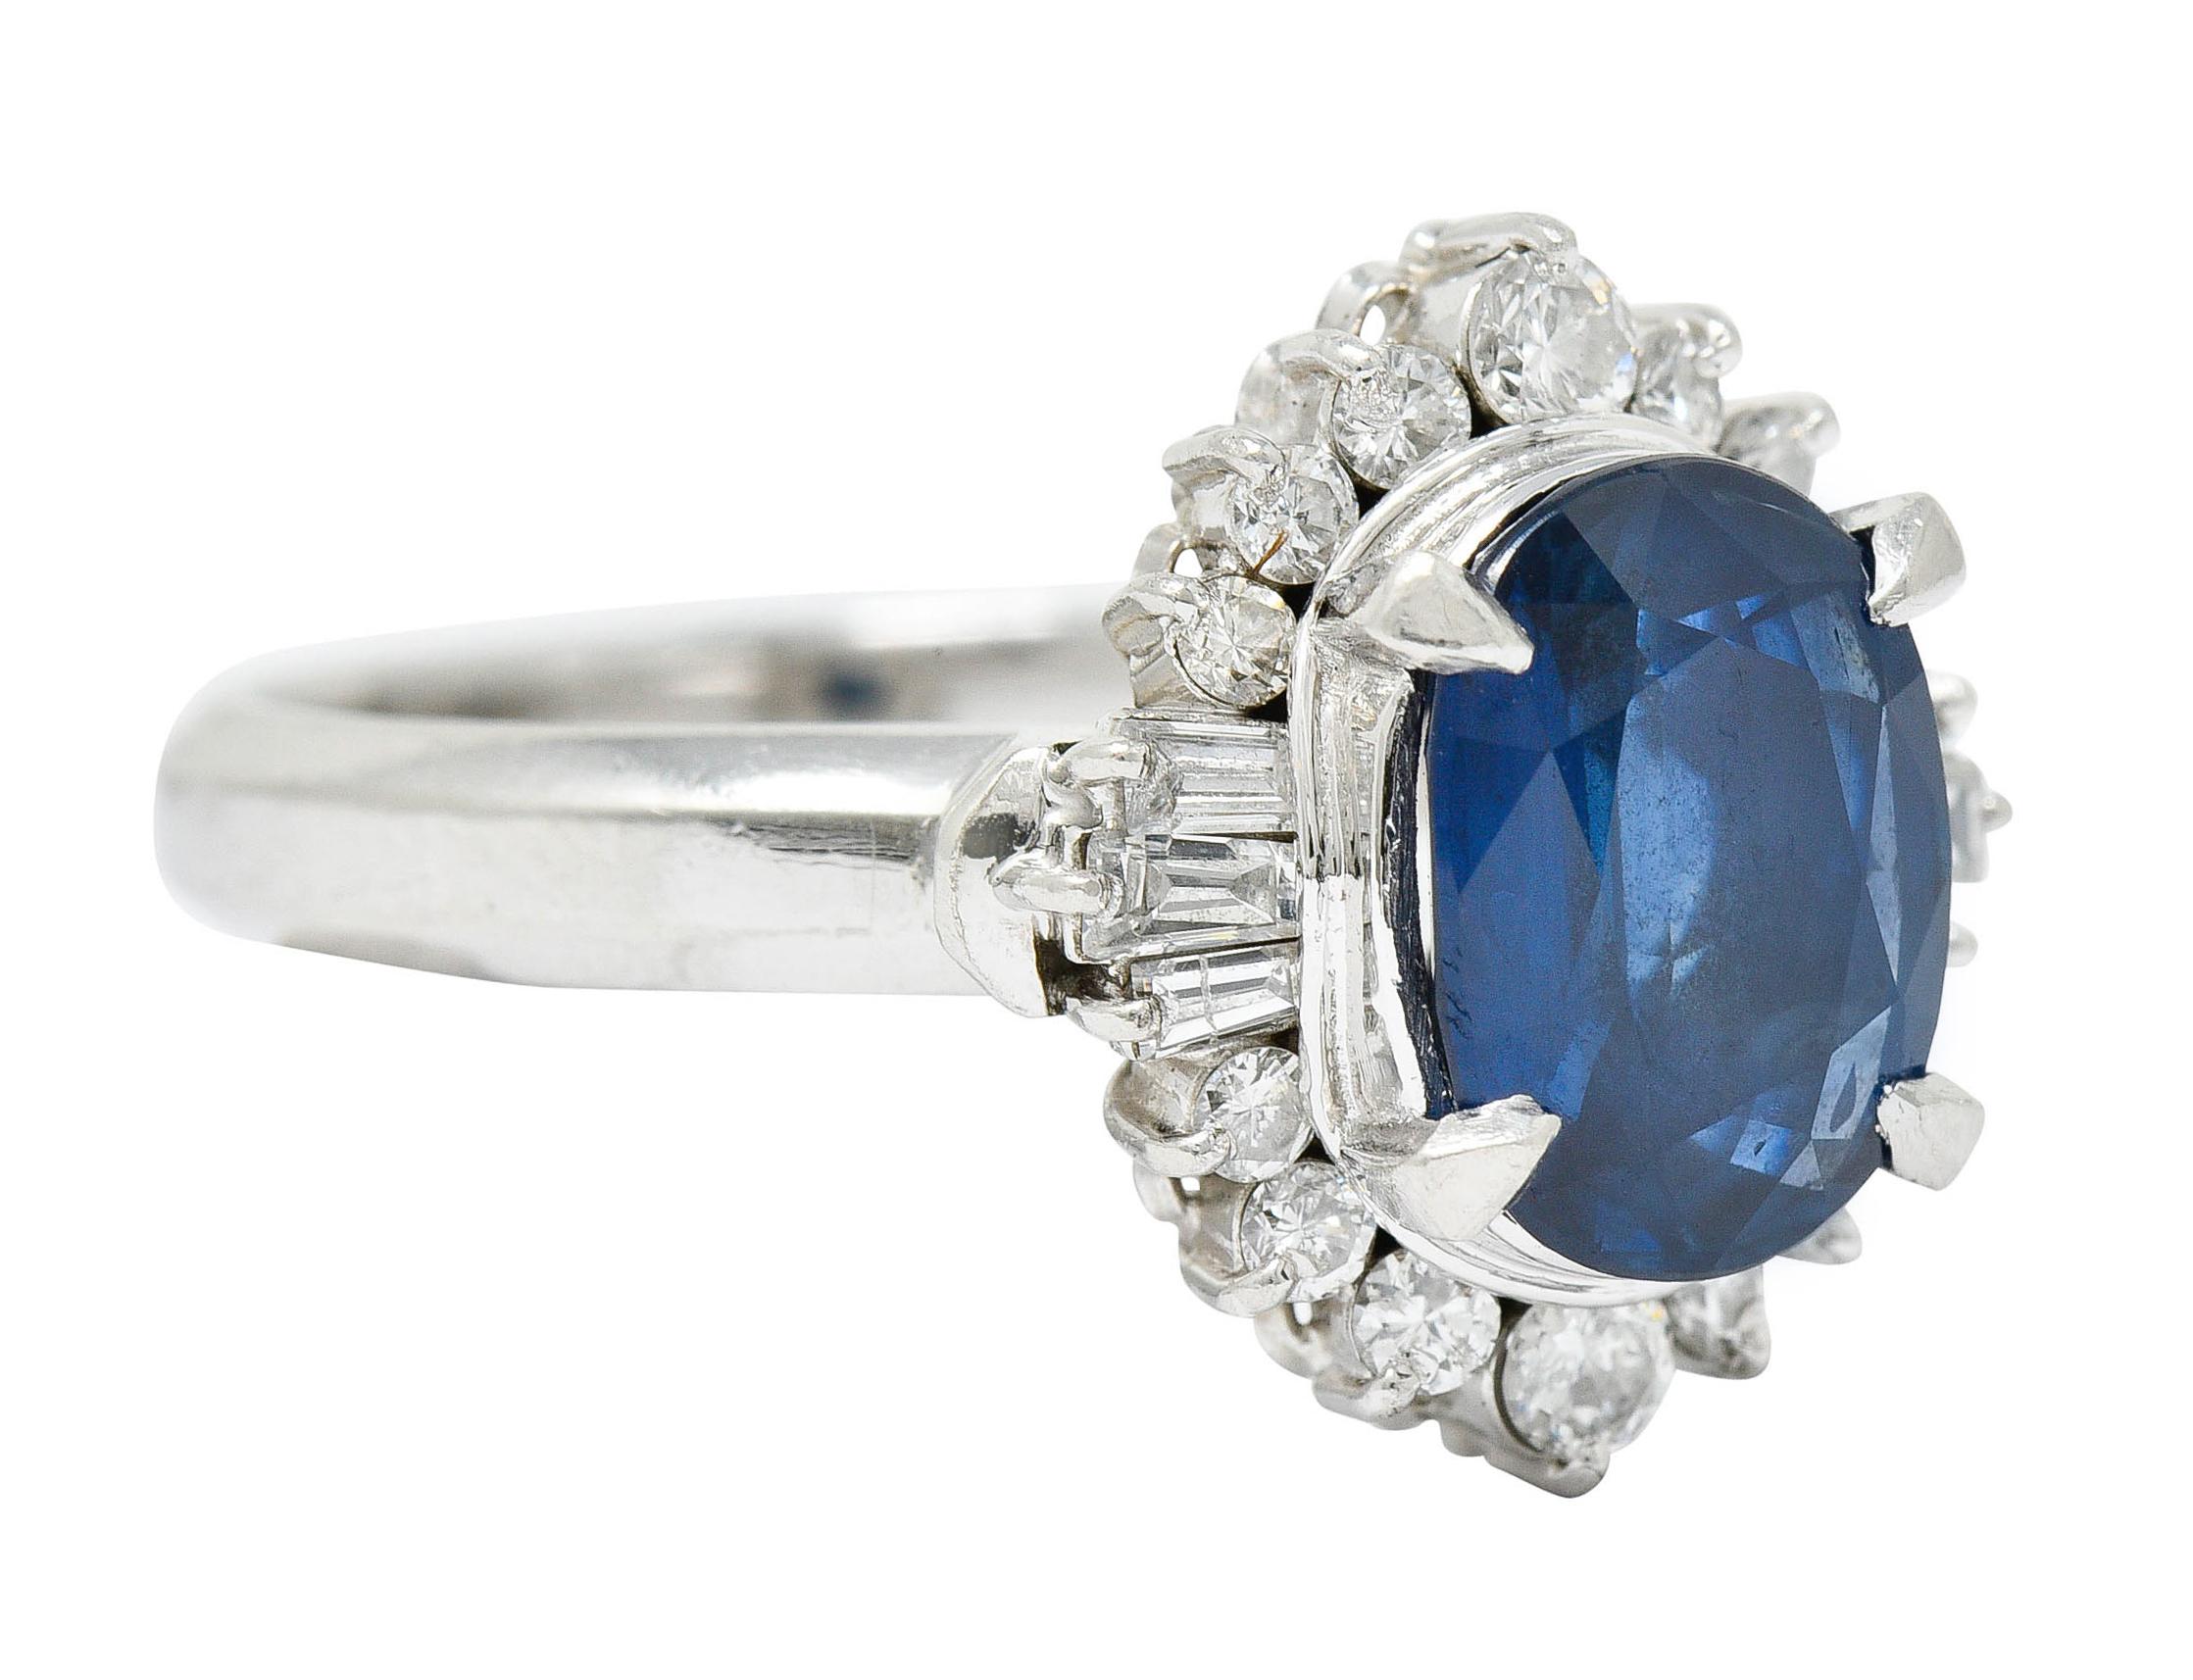 Cluster ring centers an oval cushion cut sapphire weighing approximately 2.94 carats

Talon set with transparent medium-dark royal blue color

Surrounded by diamond halo comprised of baguette and round brilliant cut diamonds

Weighing in total